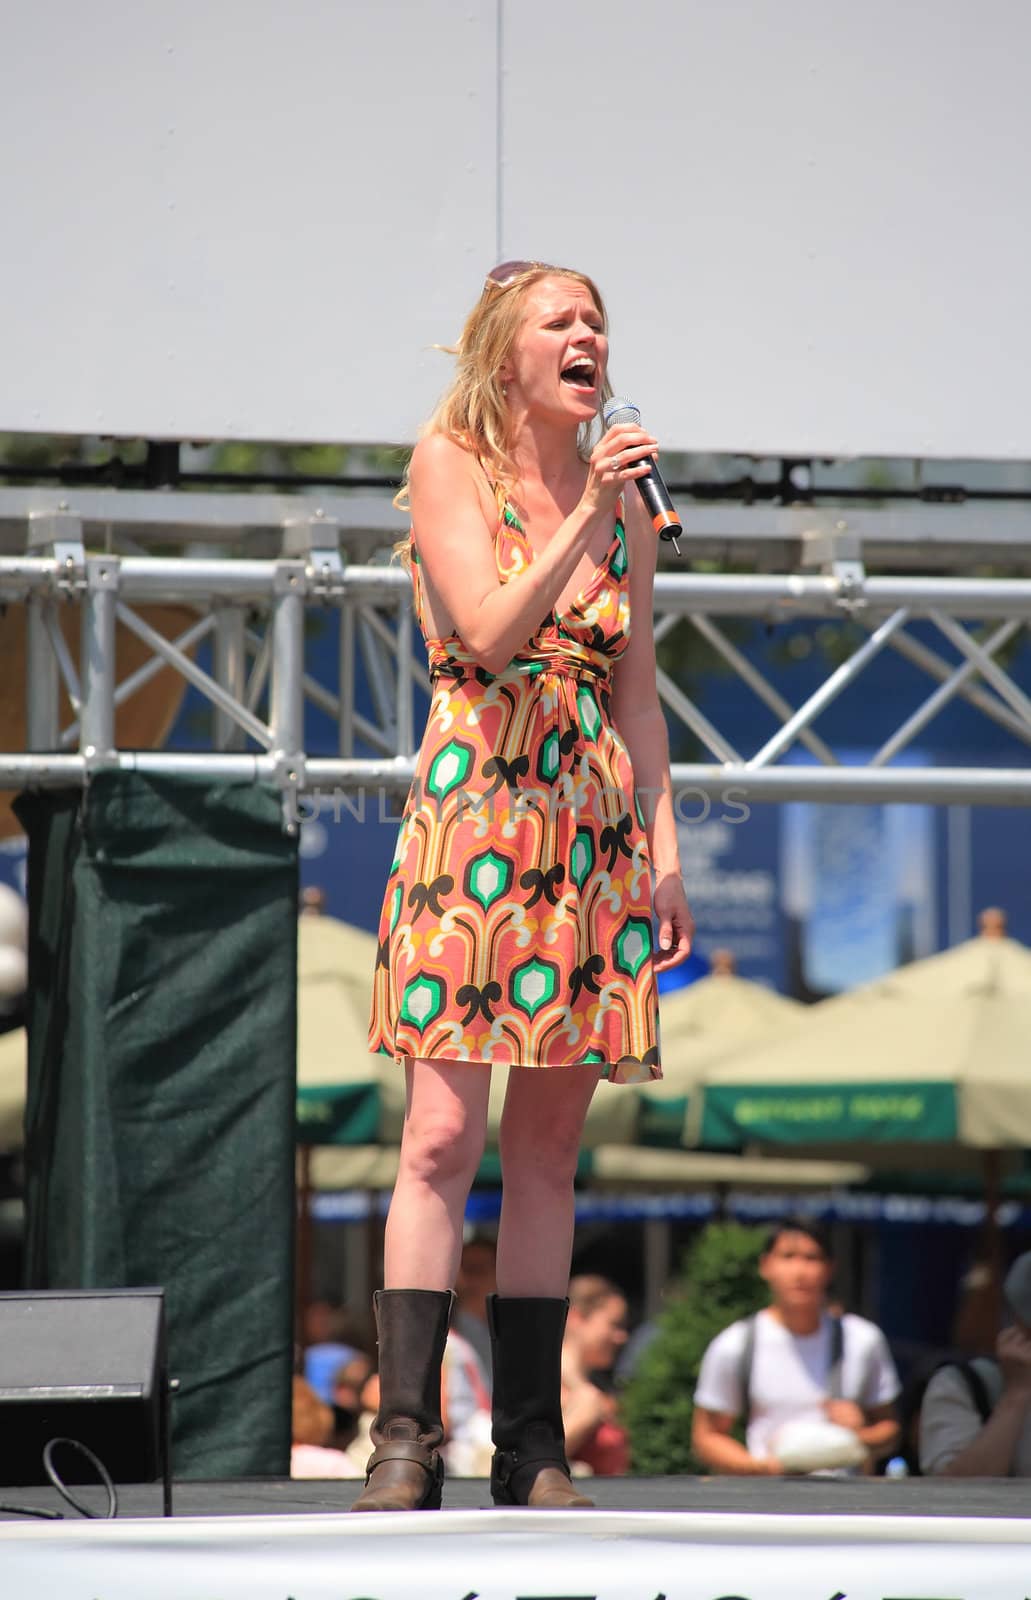 NEW YORK - 17: Lauren Kennedy Performed in the Pure Country - The Broadway at Bryant Park in NYC - a free public event on July 17, 2008  